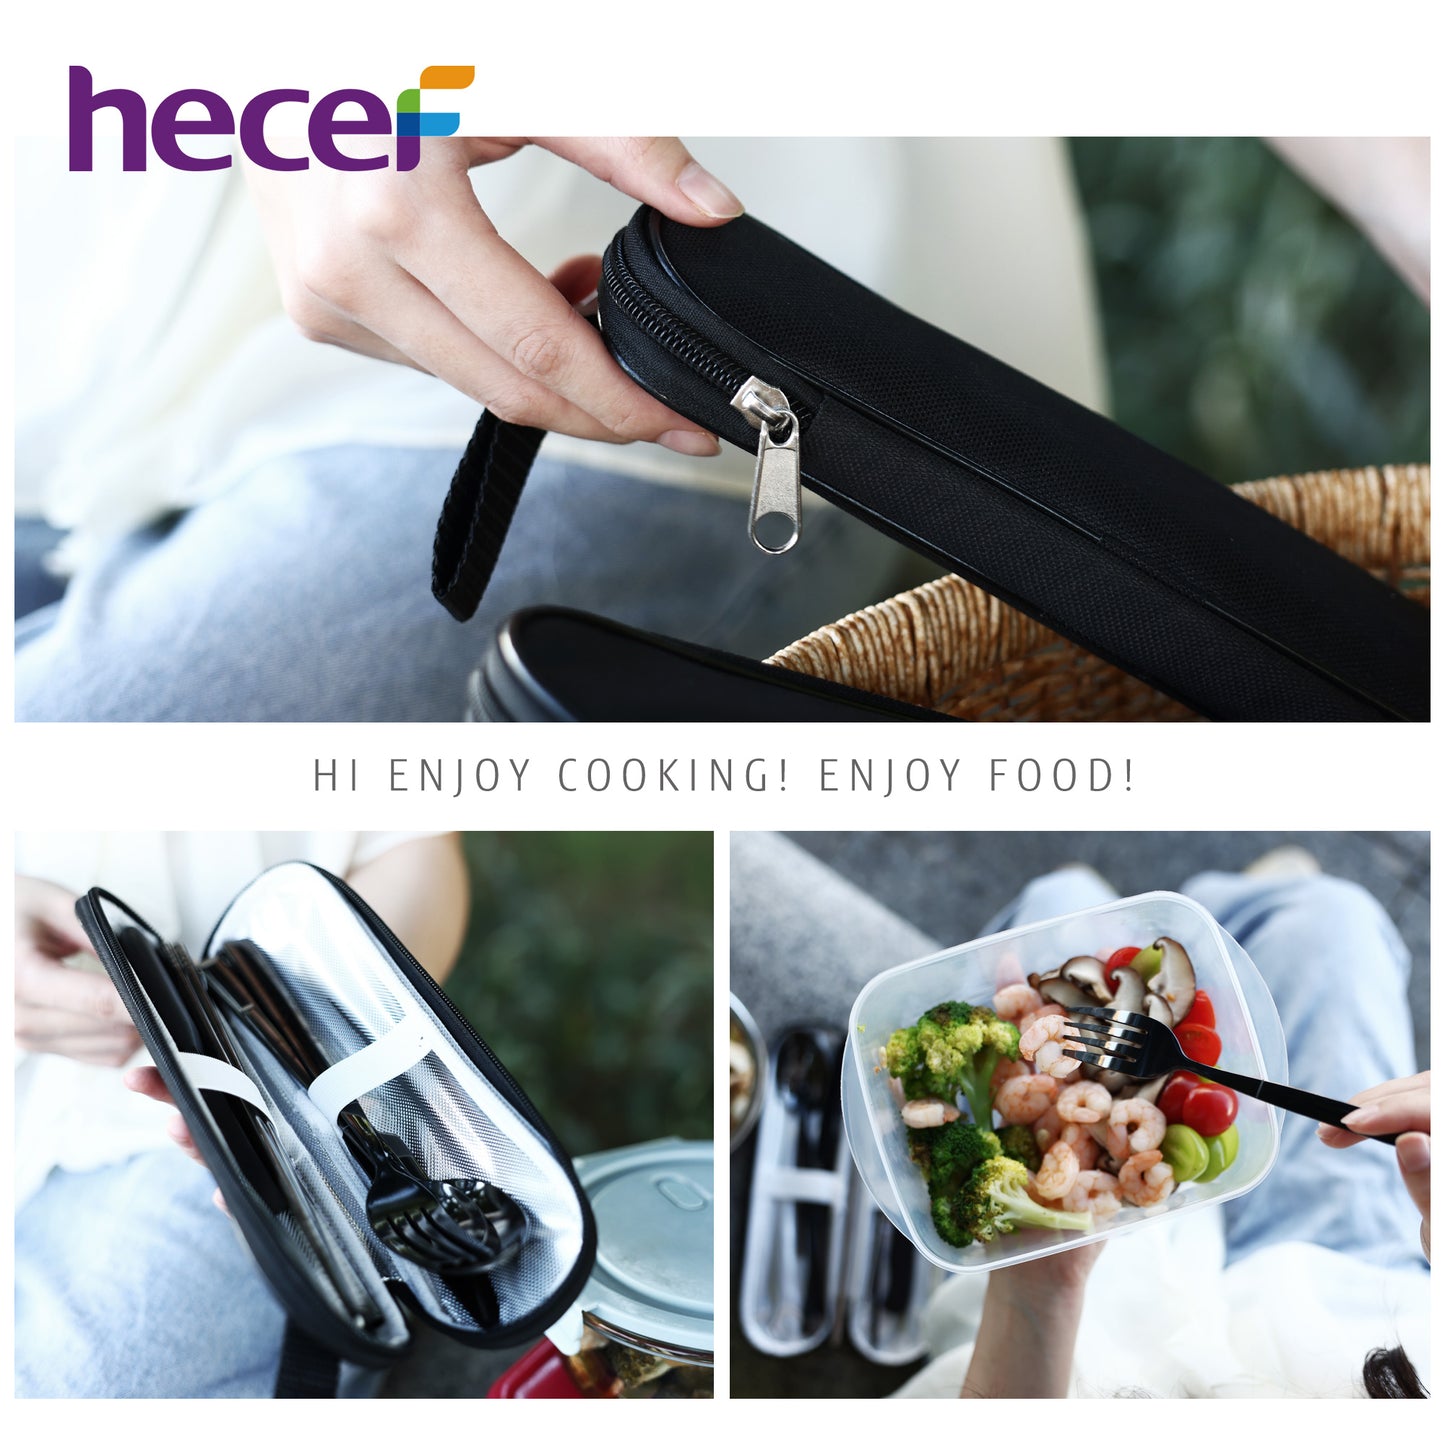 Hecef 9 Pieces Camping Cutlery Set with Compact Carrying Case, Reusable 18/0 Stainless Steel Utensils, Handy Flatware Set for Work, School, Camping and Travel - Hecef Kitchen